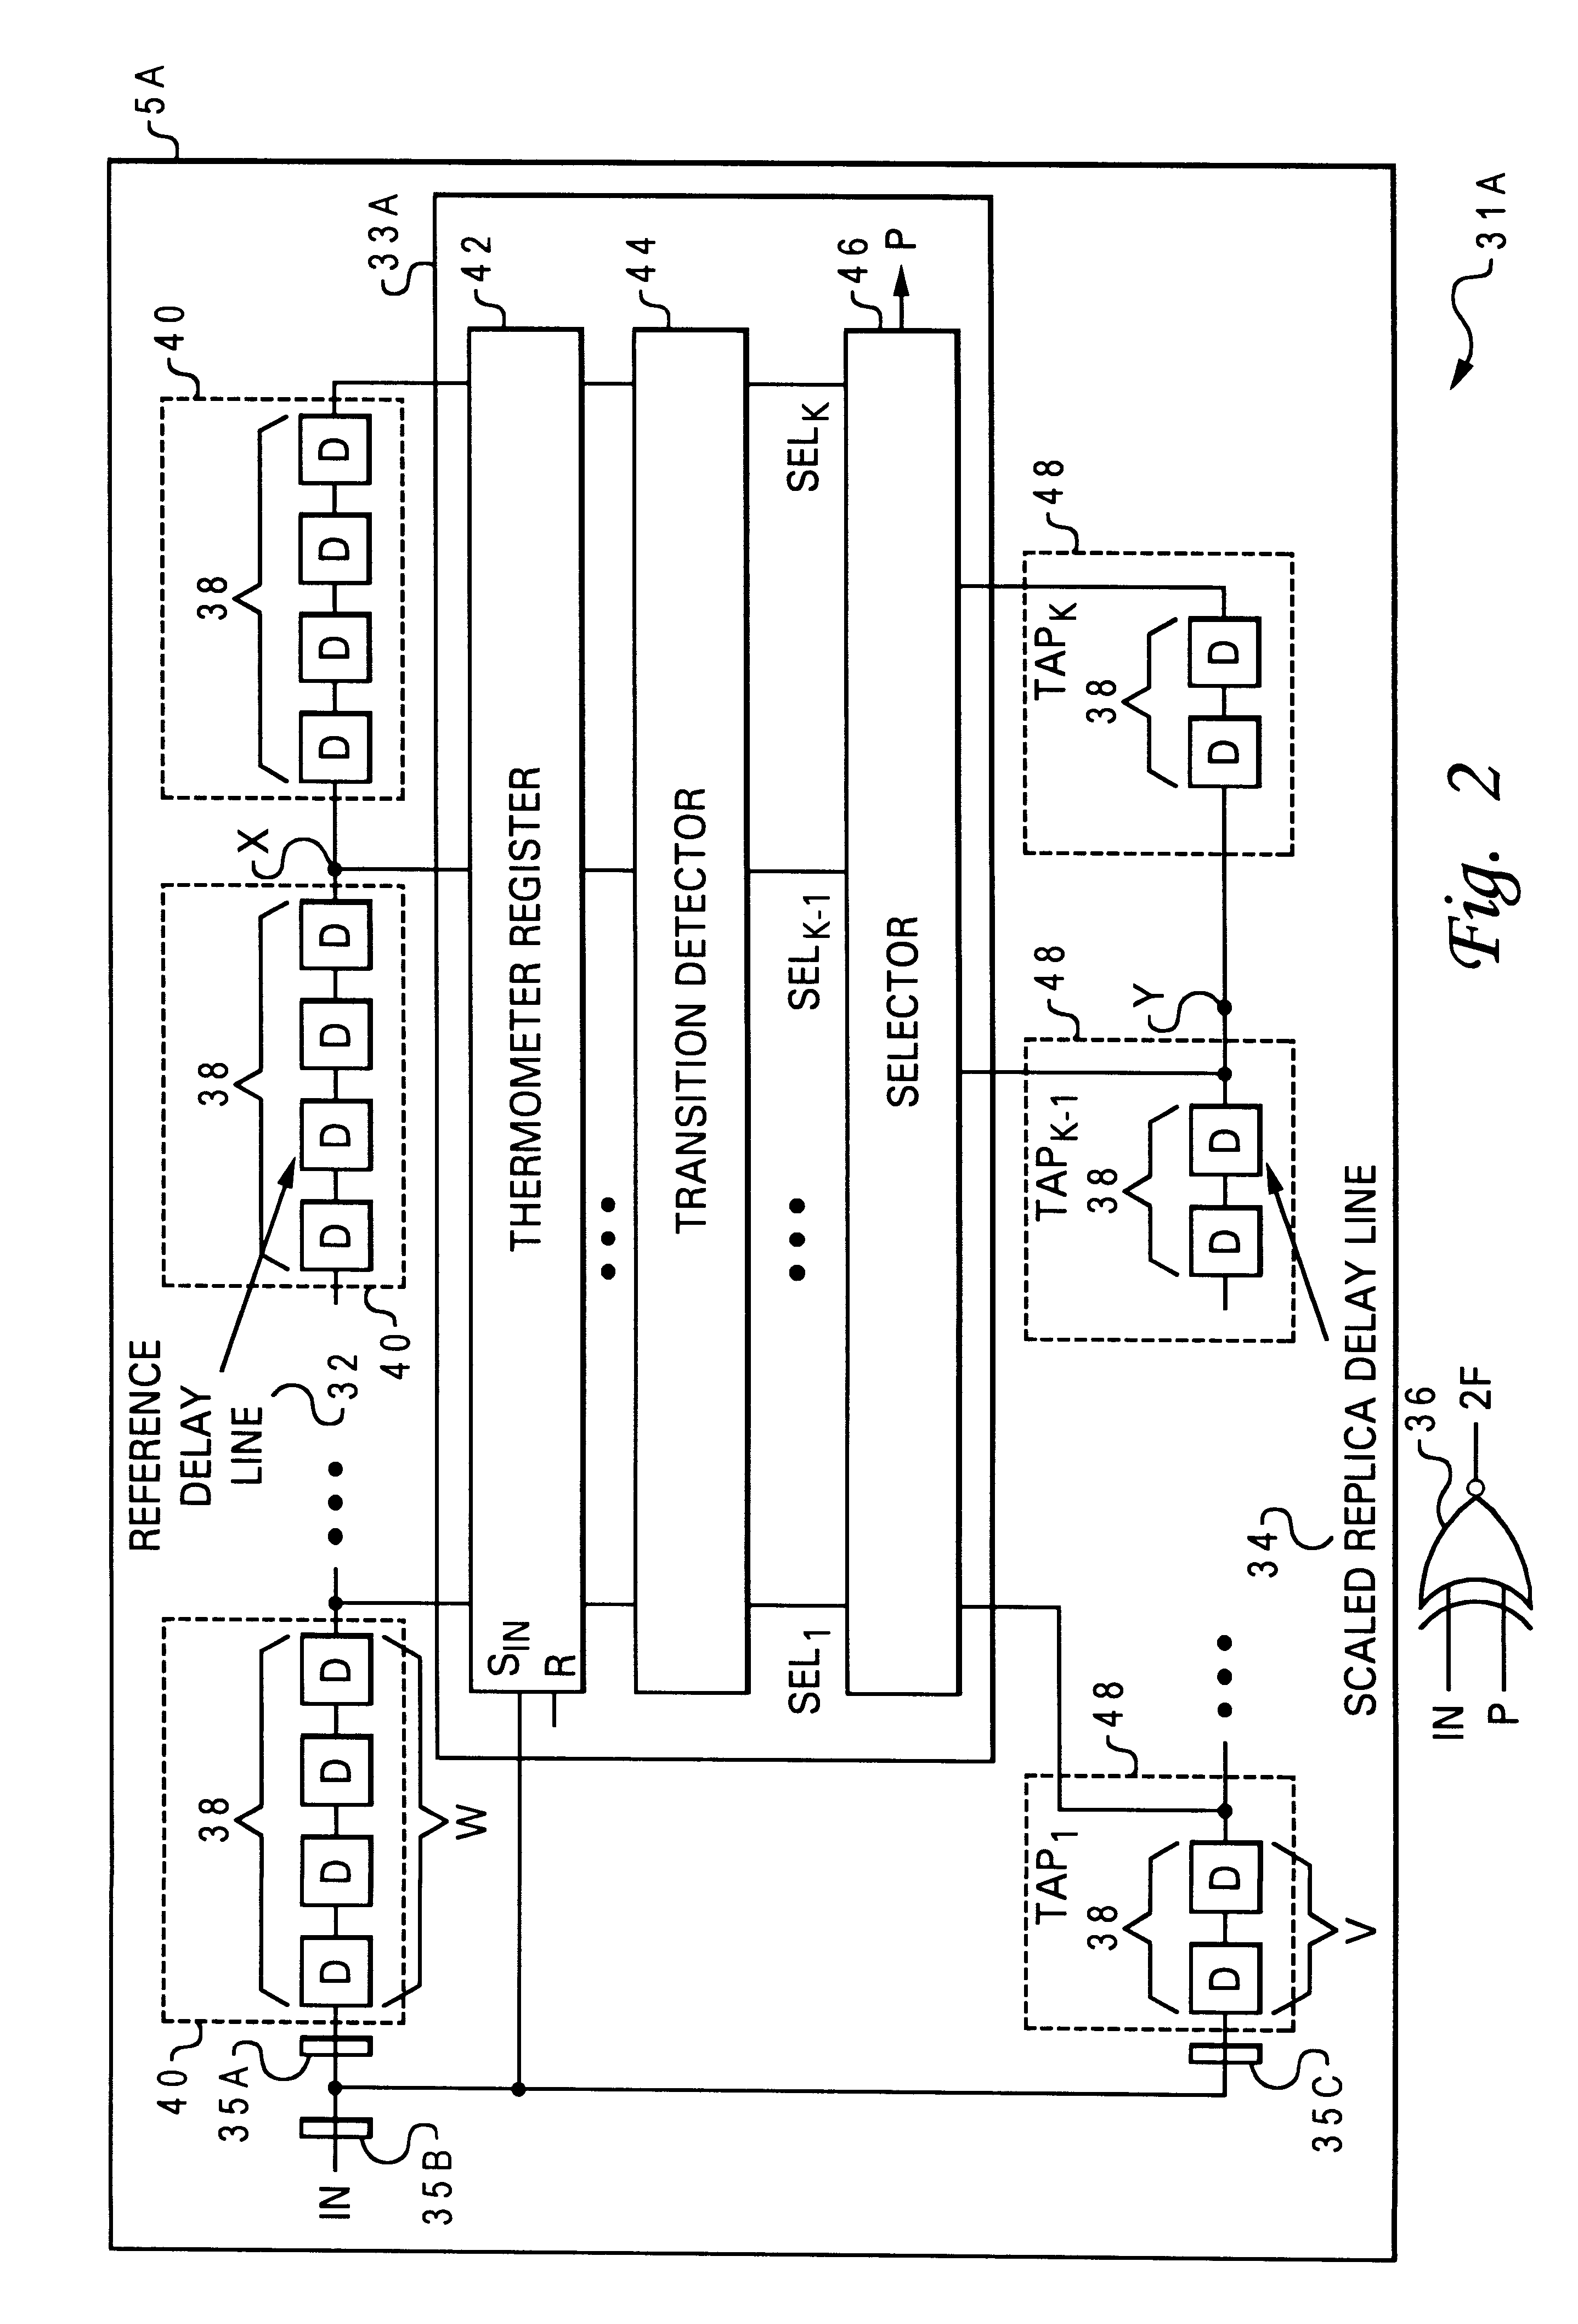 Delayed matching signal generator and frequency multiplier using scaled delay networks